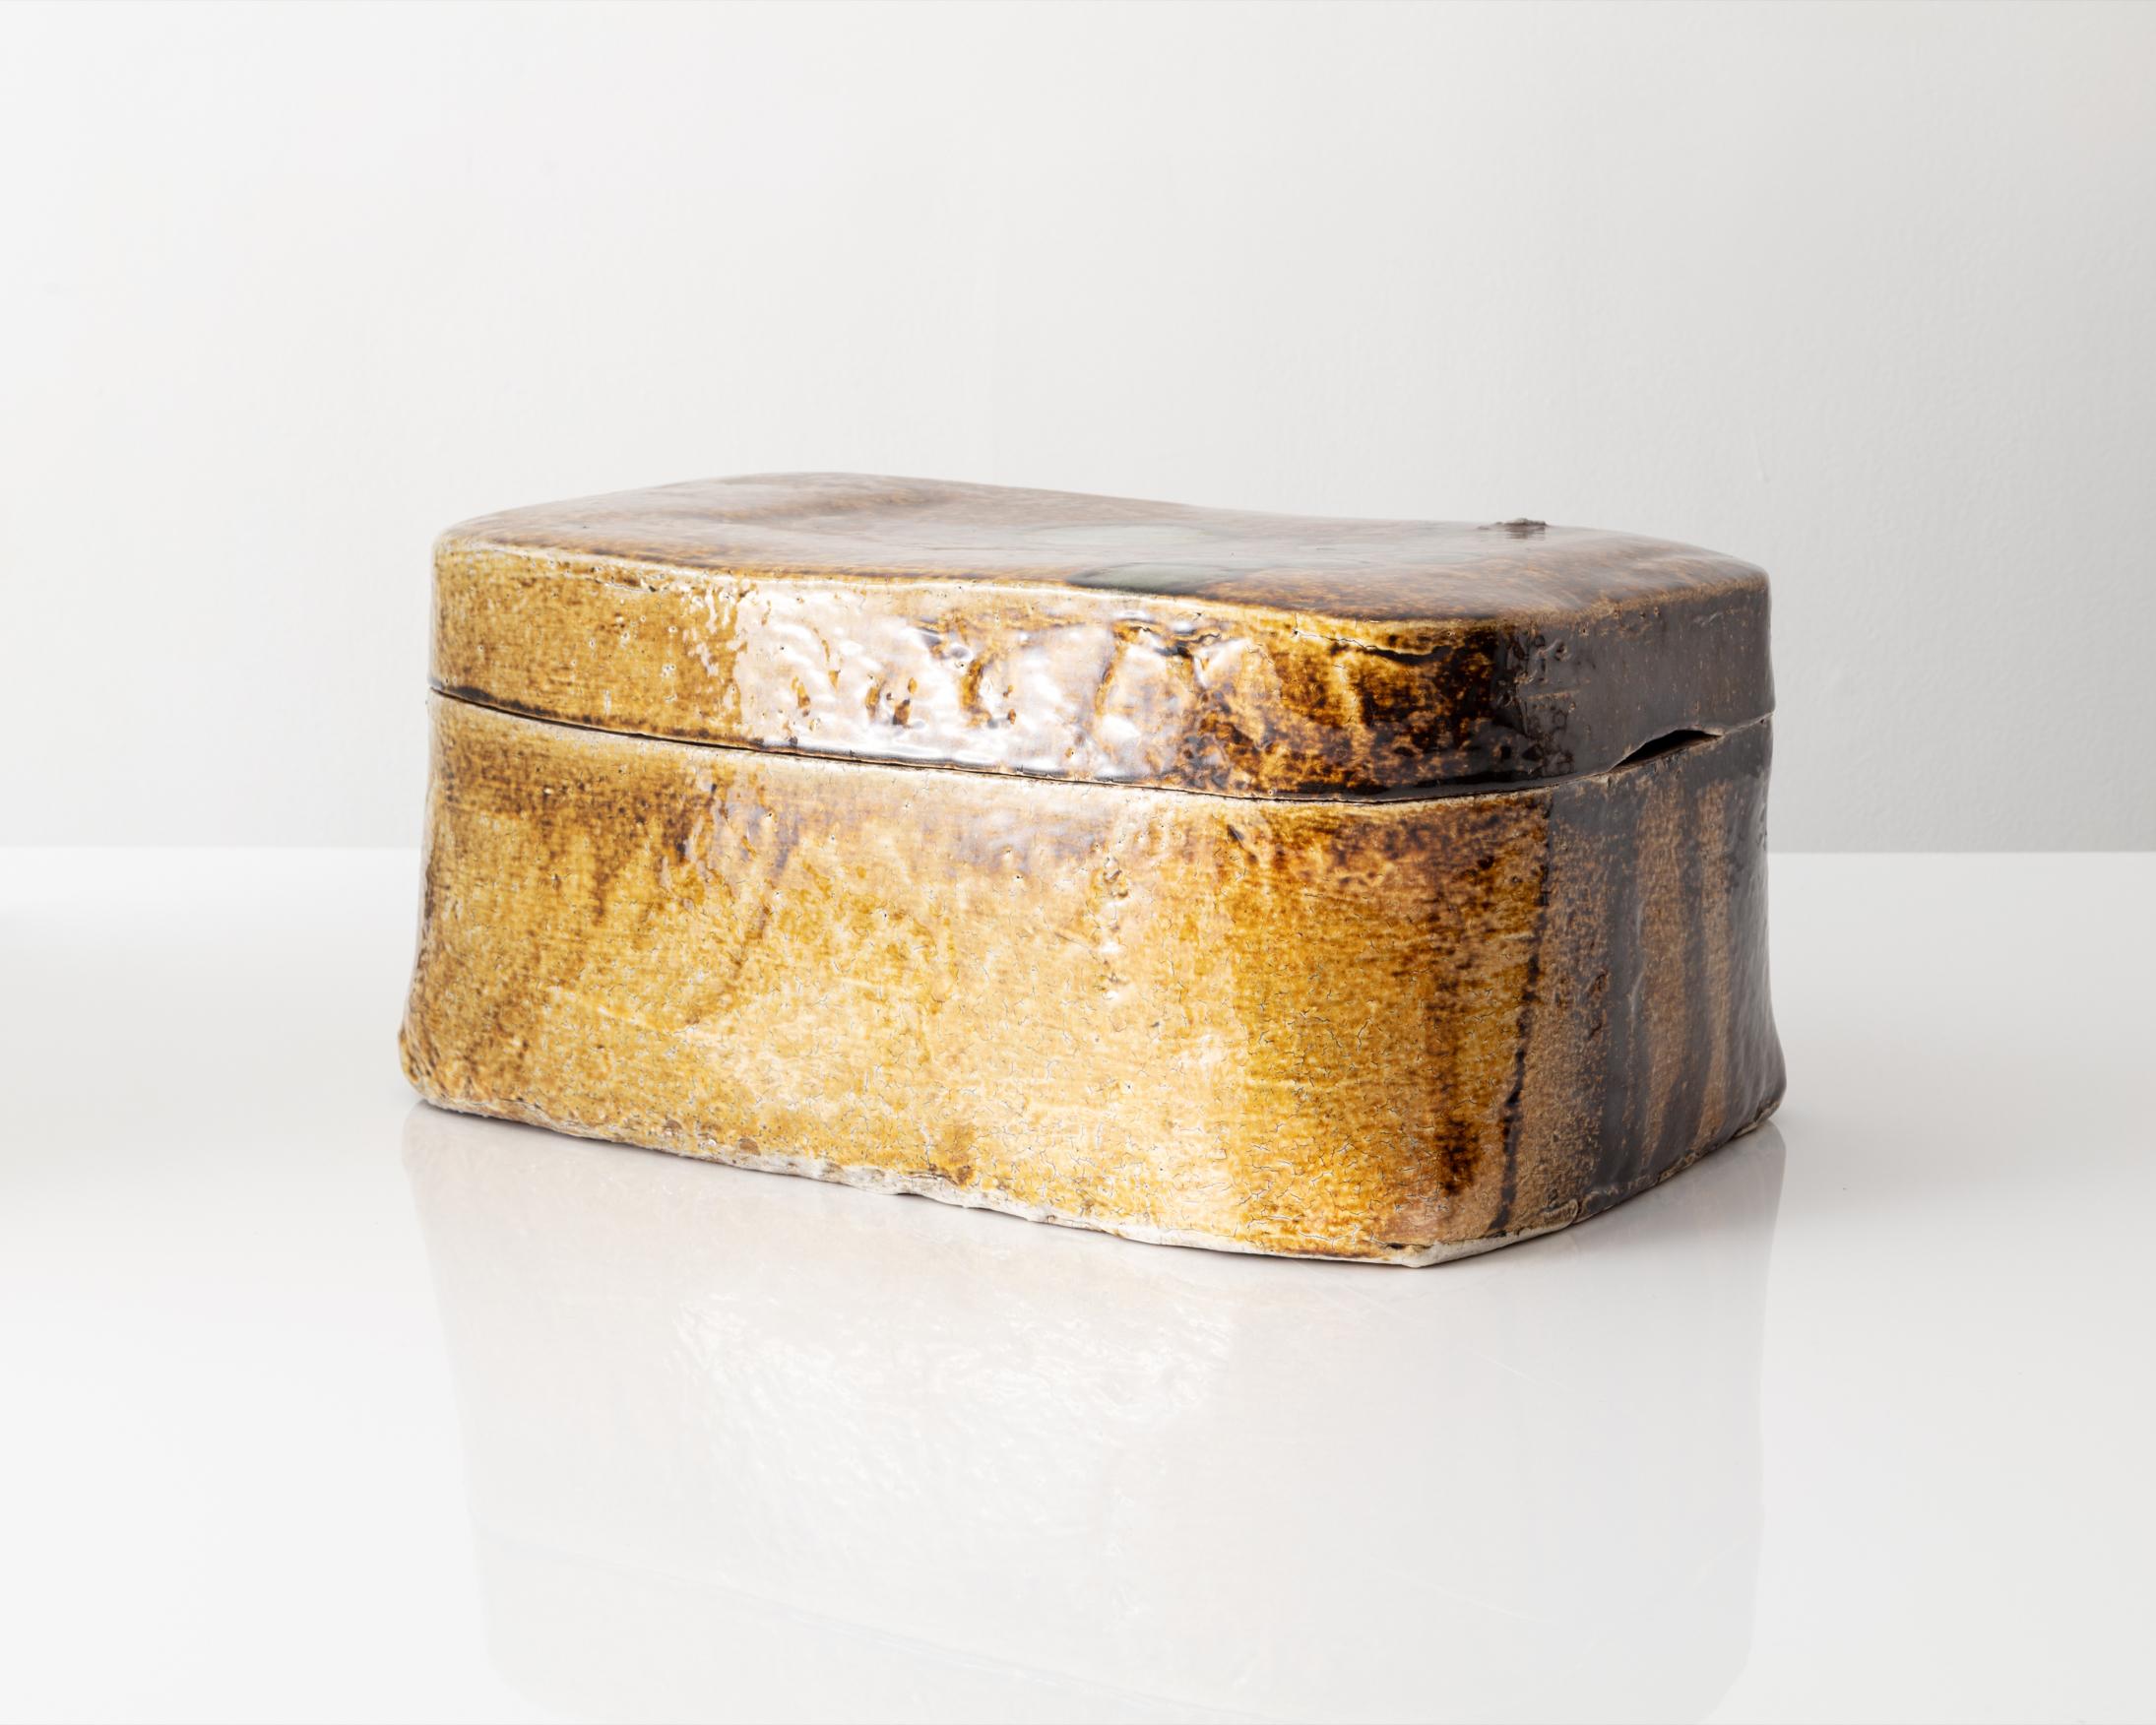 Korean Large Rectangular Ceramic Box with Lid in Golden Brown by Hun-Chung Lee, 2011